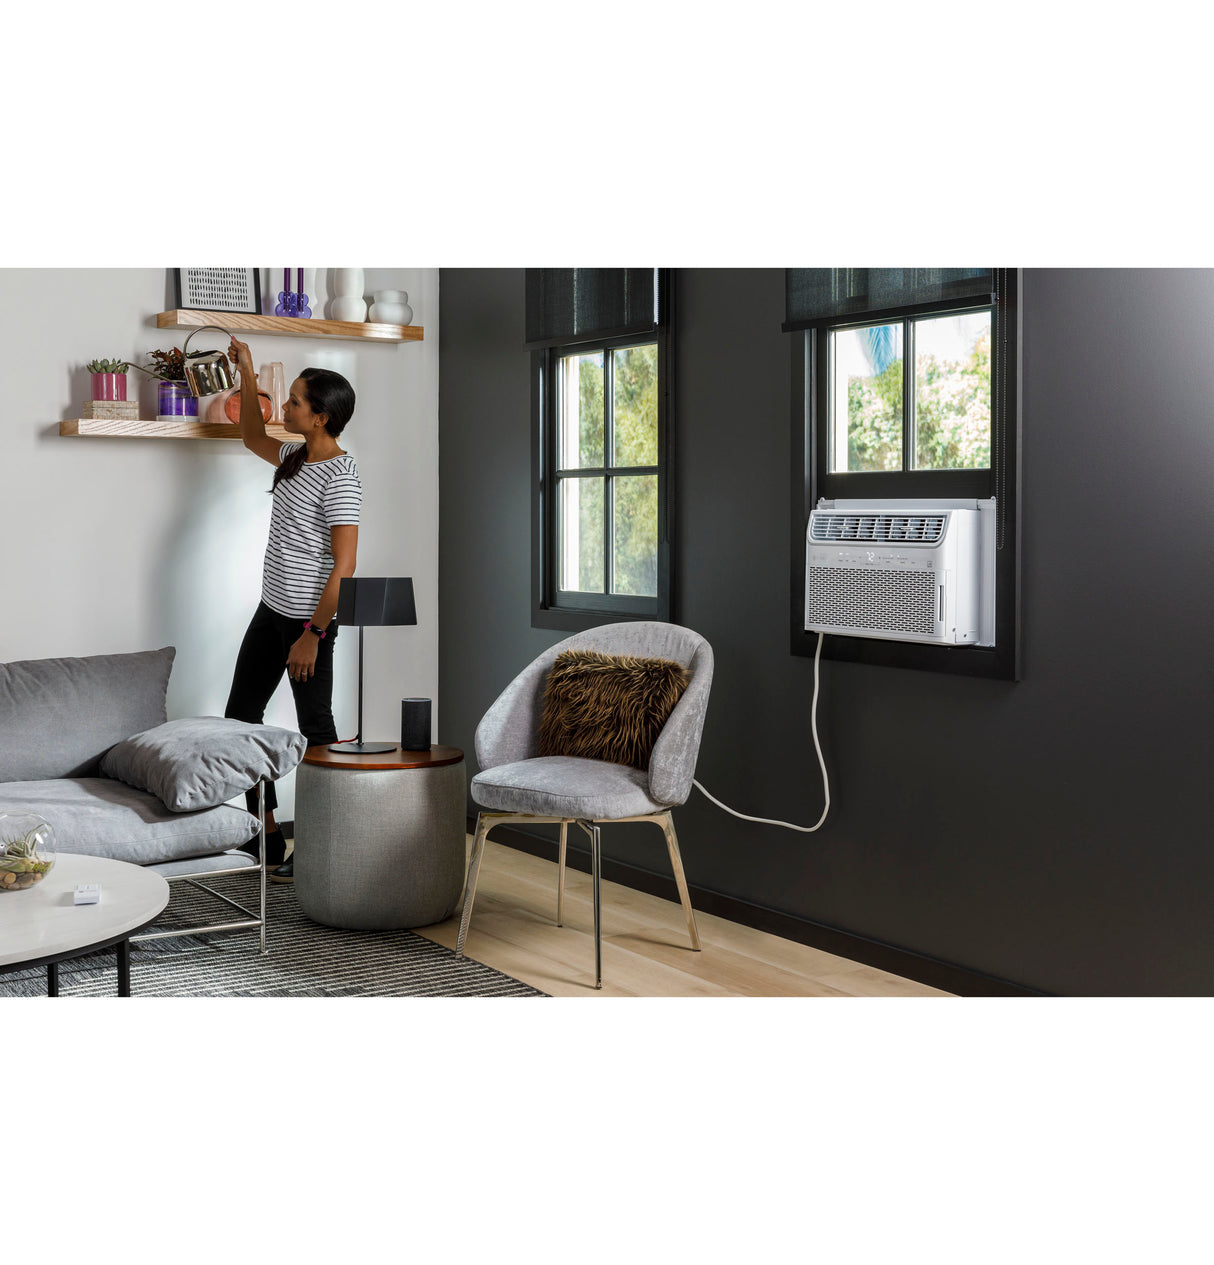 GE Profile(TM) ENERGY STAR(R) 12,000 BTU Inverter Smart Ultra Quiet Window Air Conditioner for Large Rooms up to 550 sq. ft. - (AHTR12AC)